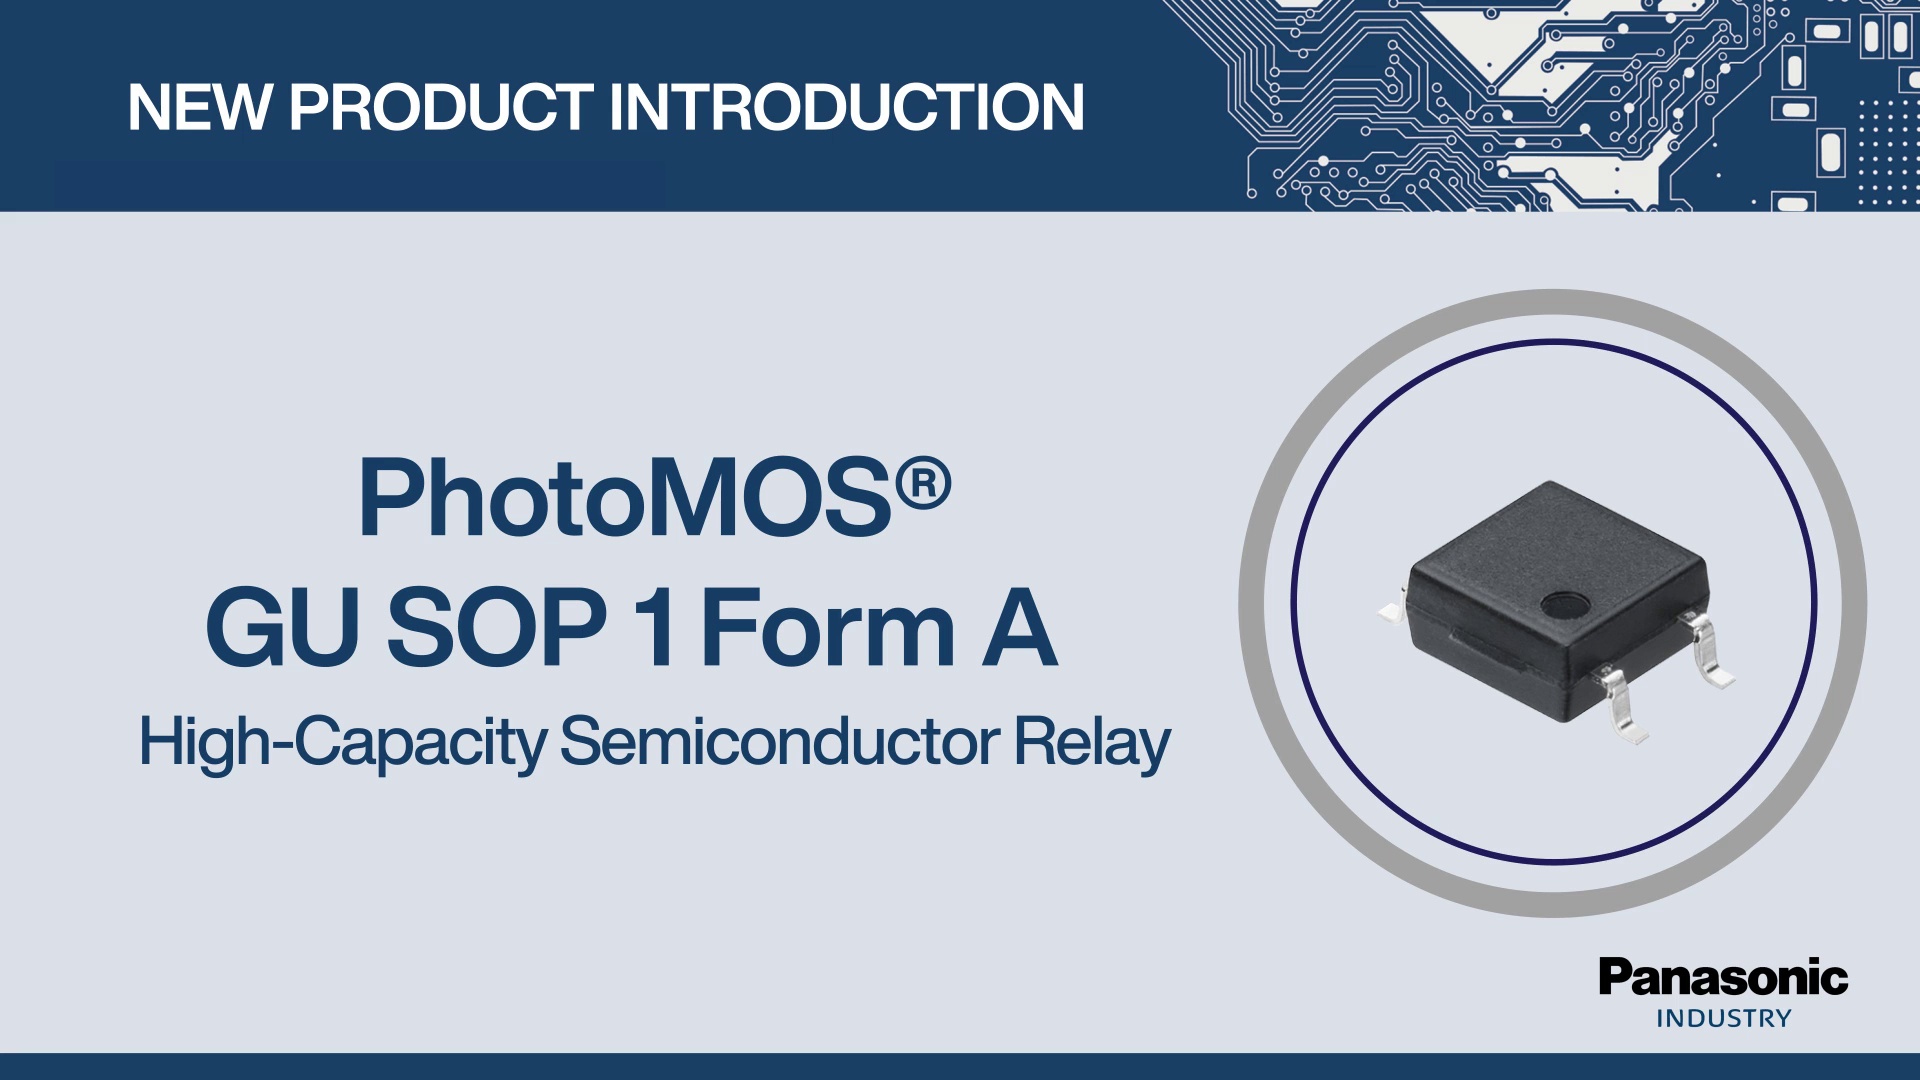 New Product Introduction: PhotoMOS® GU SOP 1 Form A High-Capacity  Semiconductor Relay